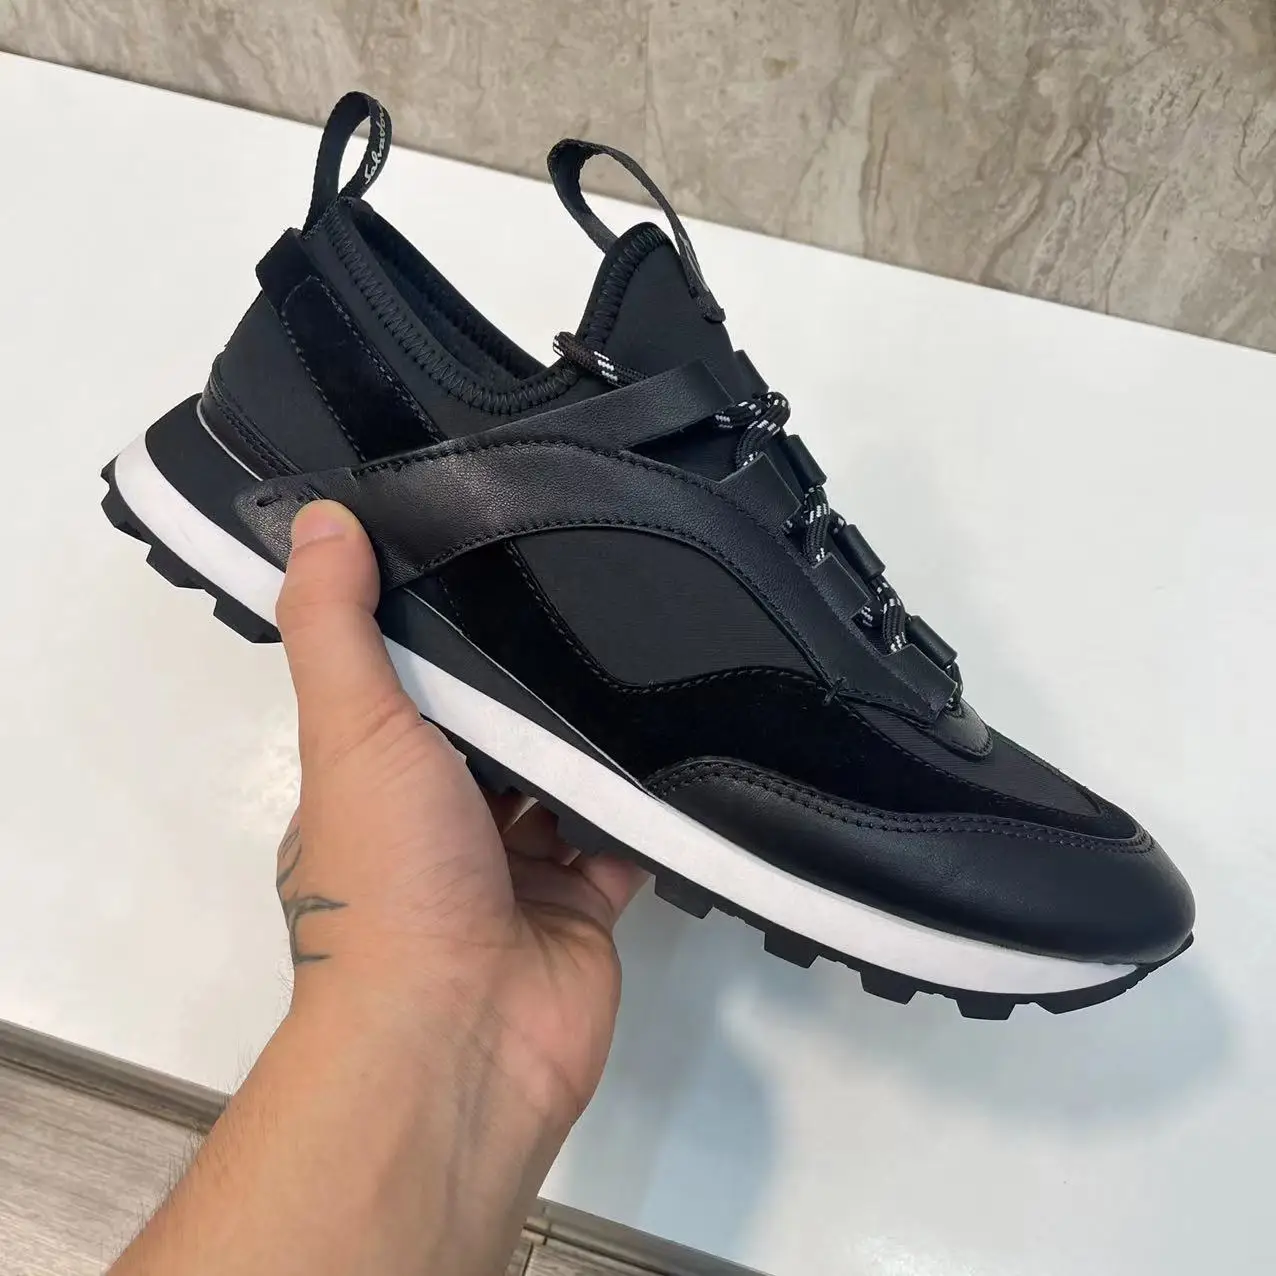 

Men's Black Low Top Sneakers Lightweight and Comfortable Sock Shoes Distinctive Look Fashion Men's Shoes Casual Jogging Shoes